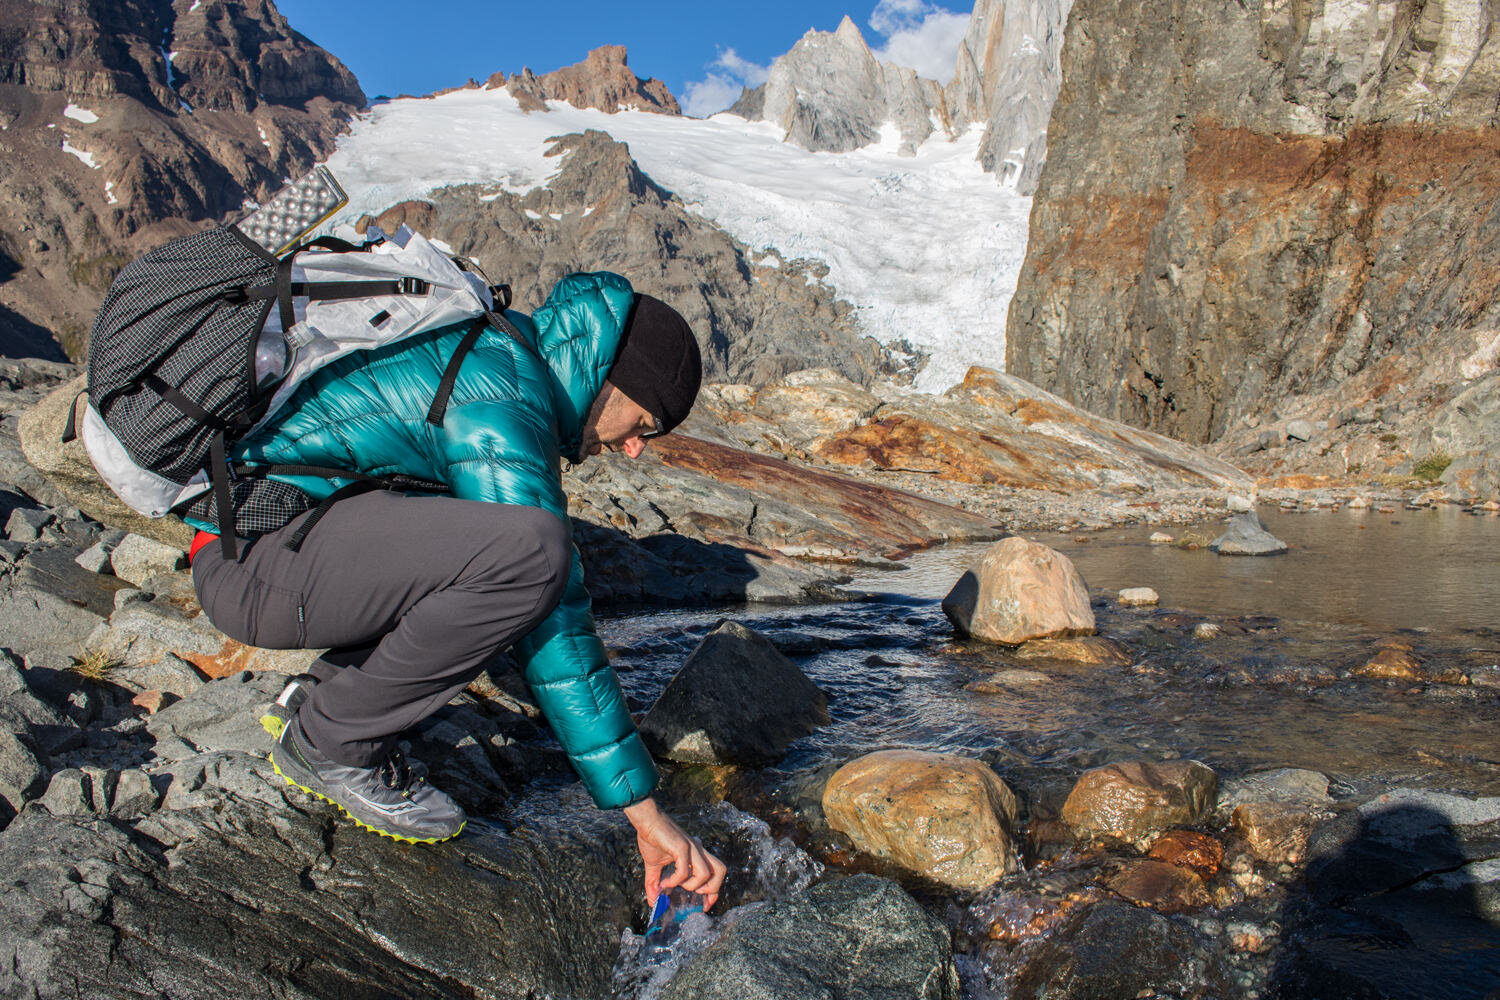 A backpacker bending down to collect water from a glacial stream in the Prana Brion Pants